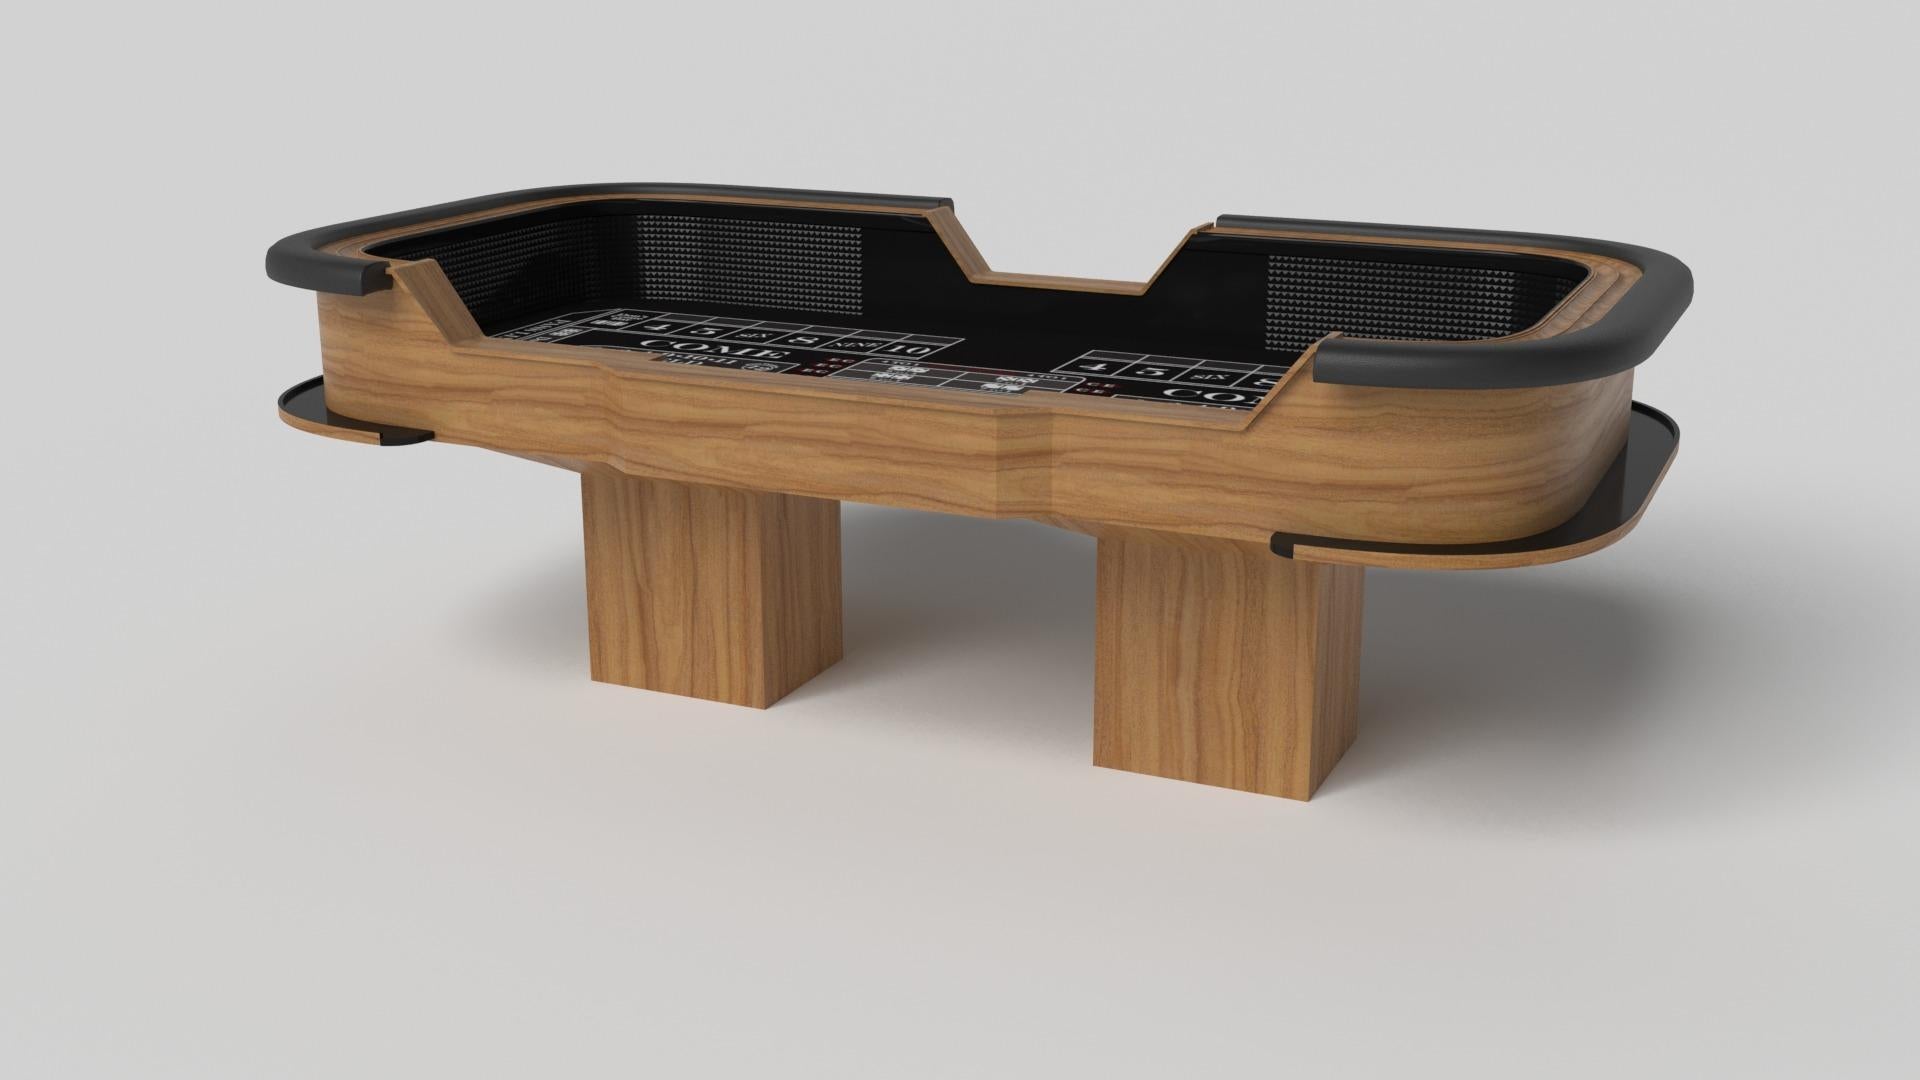 Minimalist design meets opulent elegance in the Trestle craps table. Detailed with a professional surface for endless game play, this contemporary table is expertly crafted. Square block legs give it a stark, geometric look that contributes to its